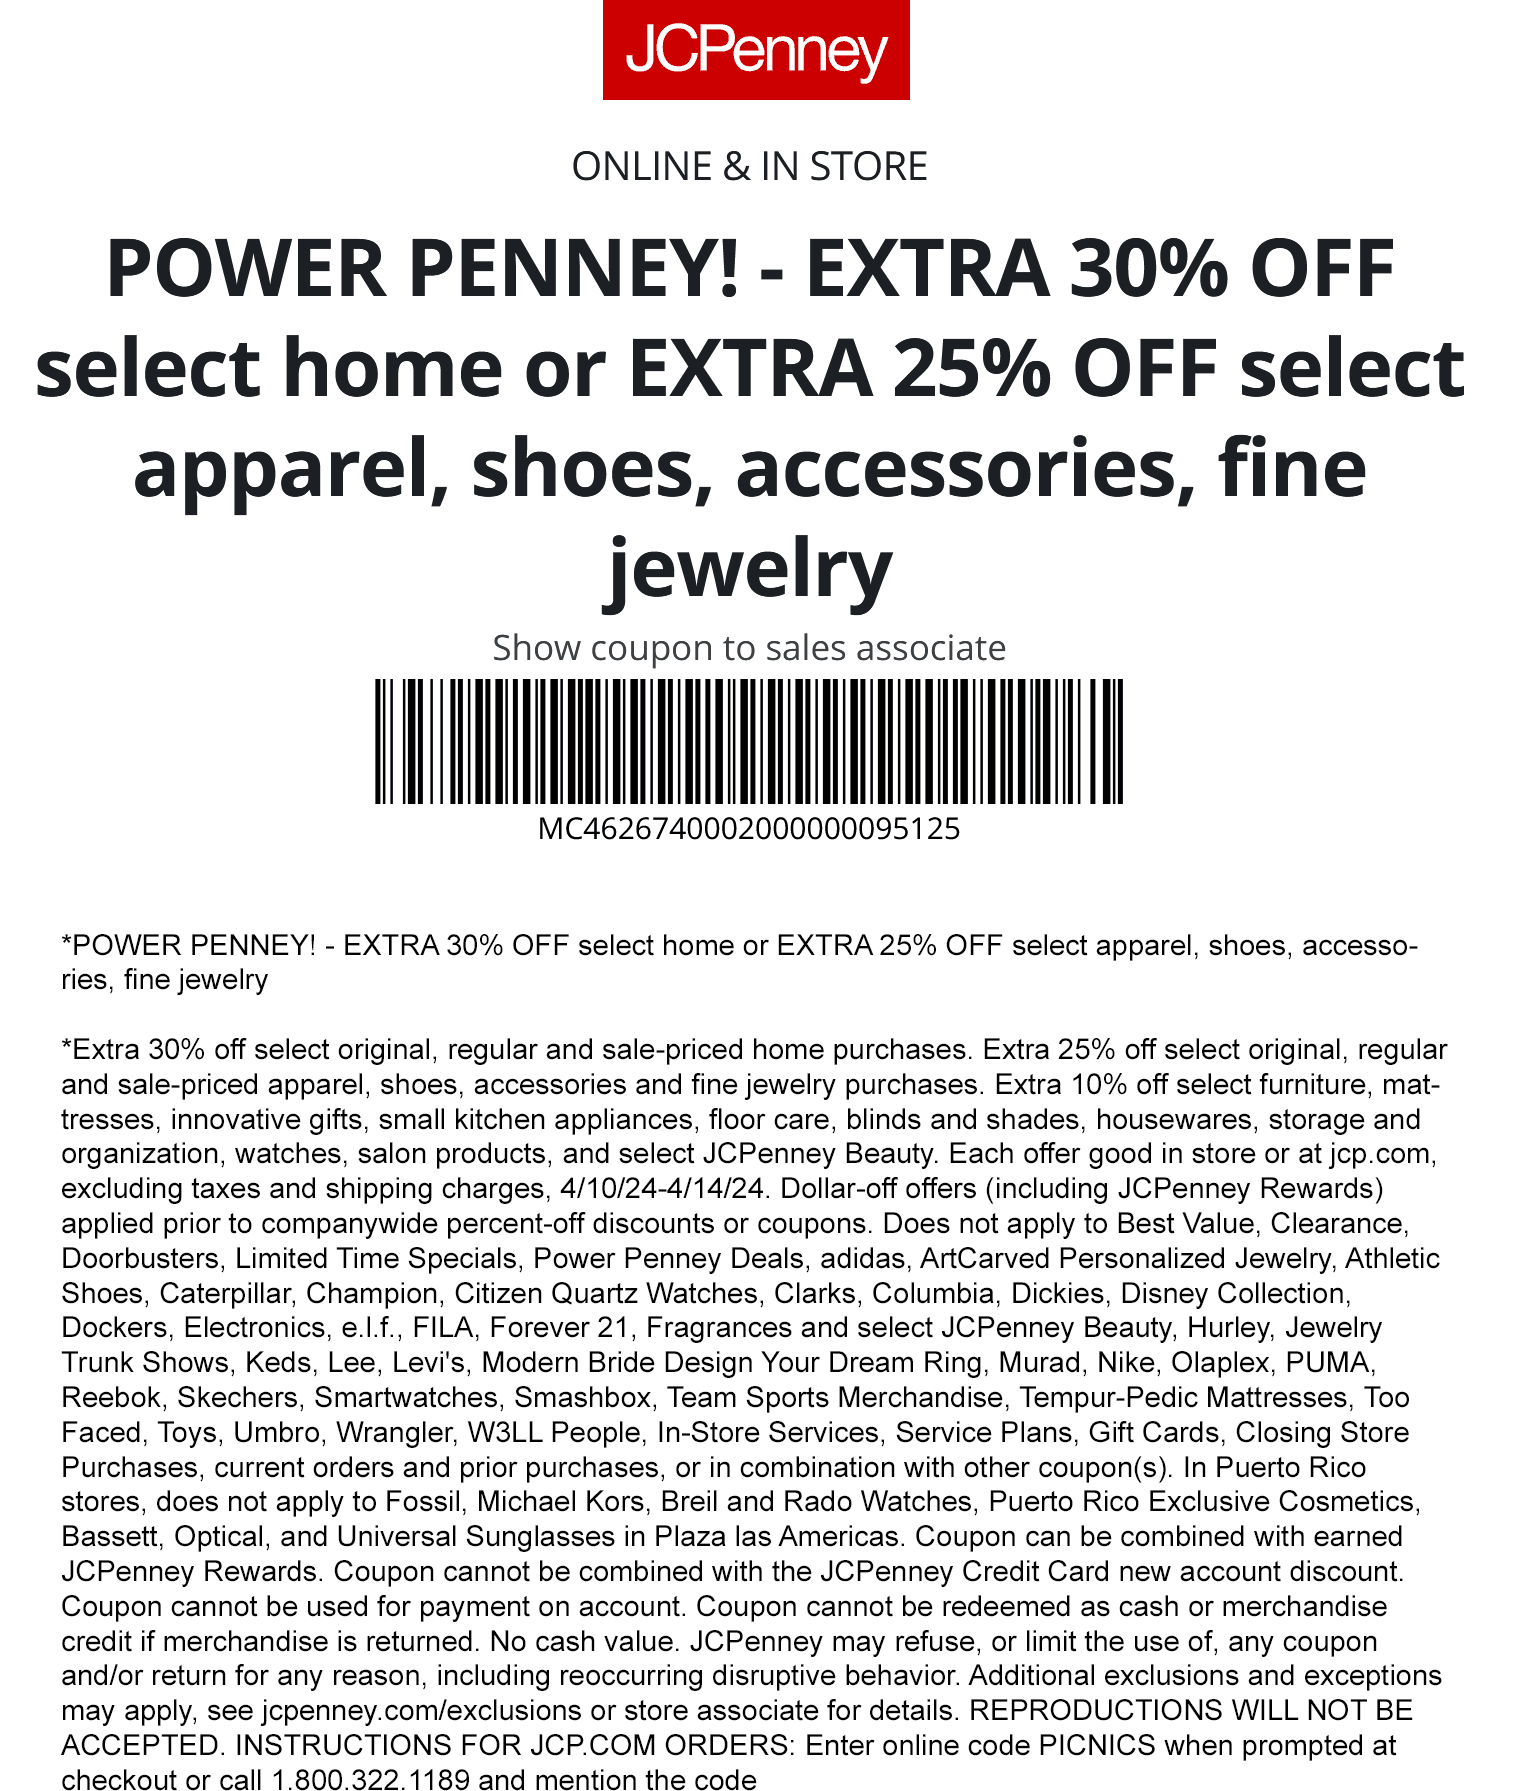 JCPenney stores Coupon  Extra 25% off today at JCPenney, or online via promo code PICNICS #jcpenney 